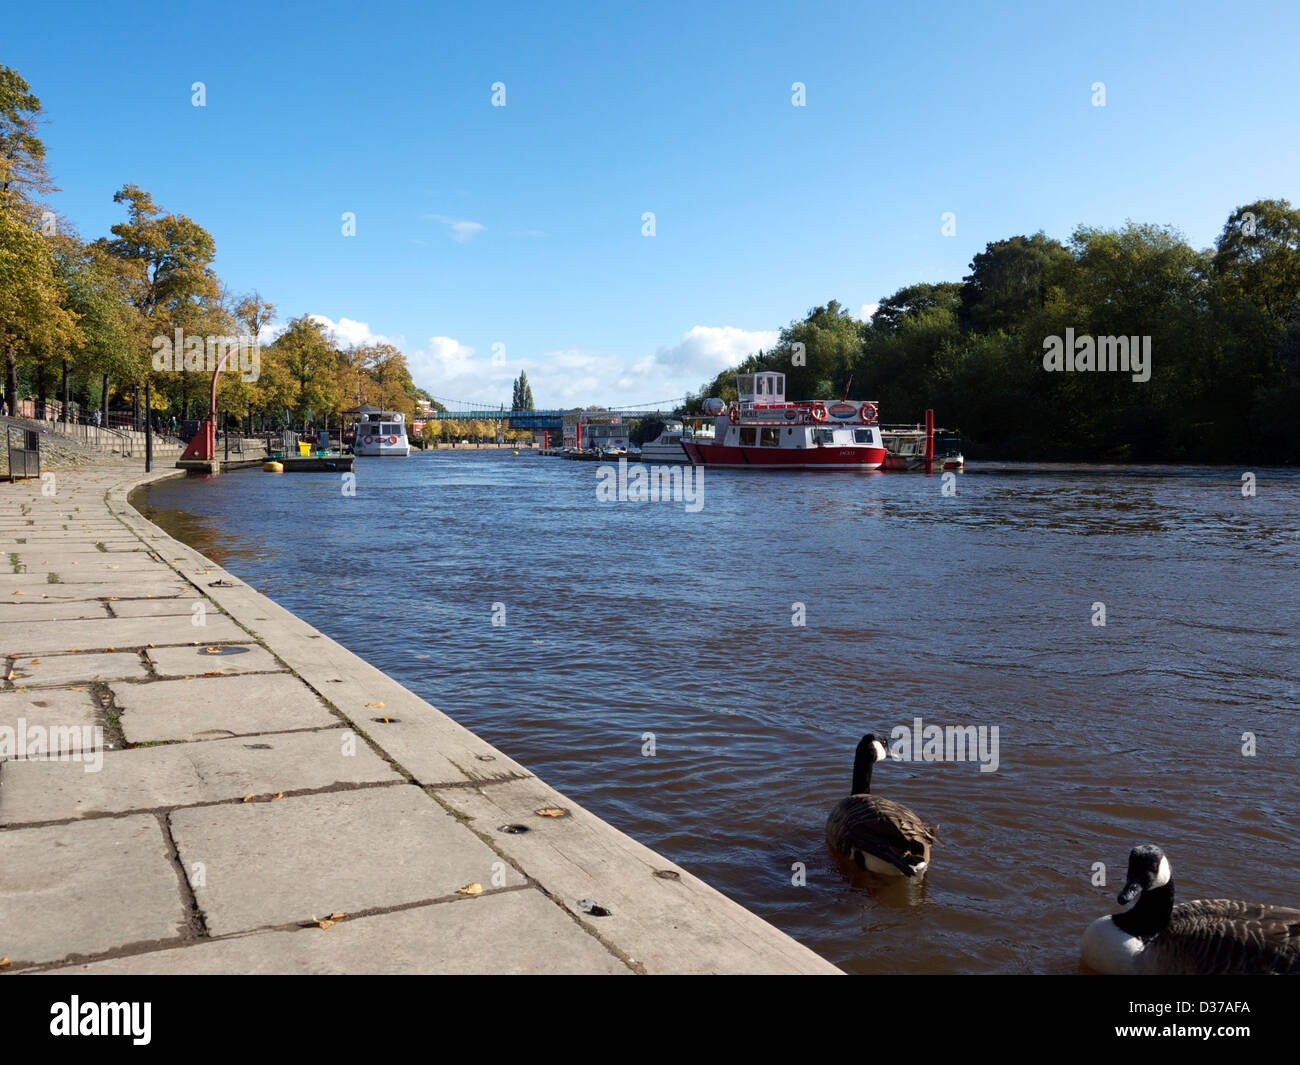 Boats on the River Dee, with ducks in the foreground in Chester, England, UK. Stock Photo